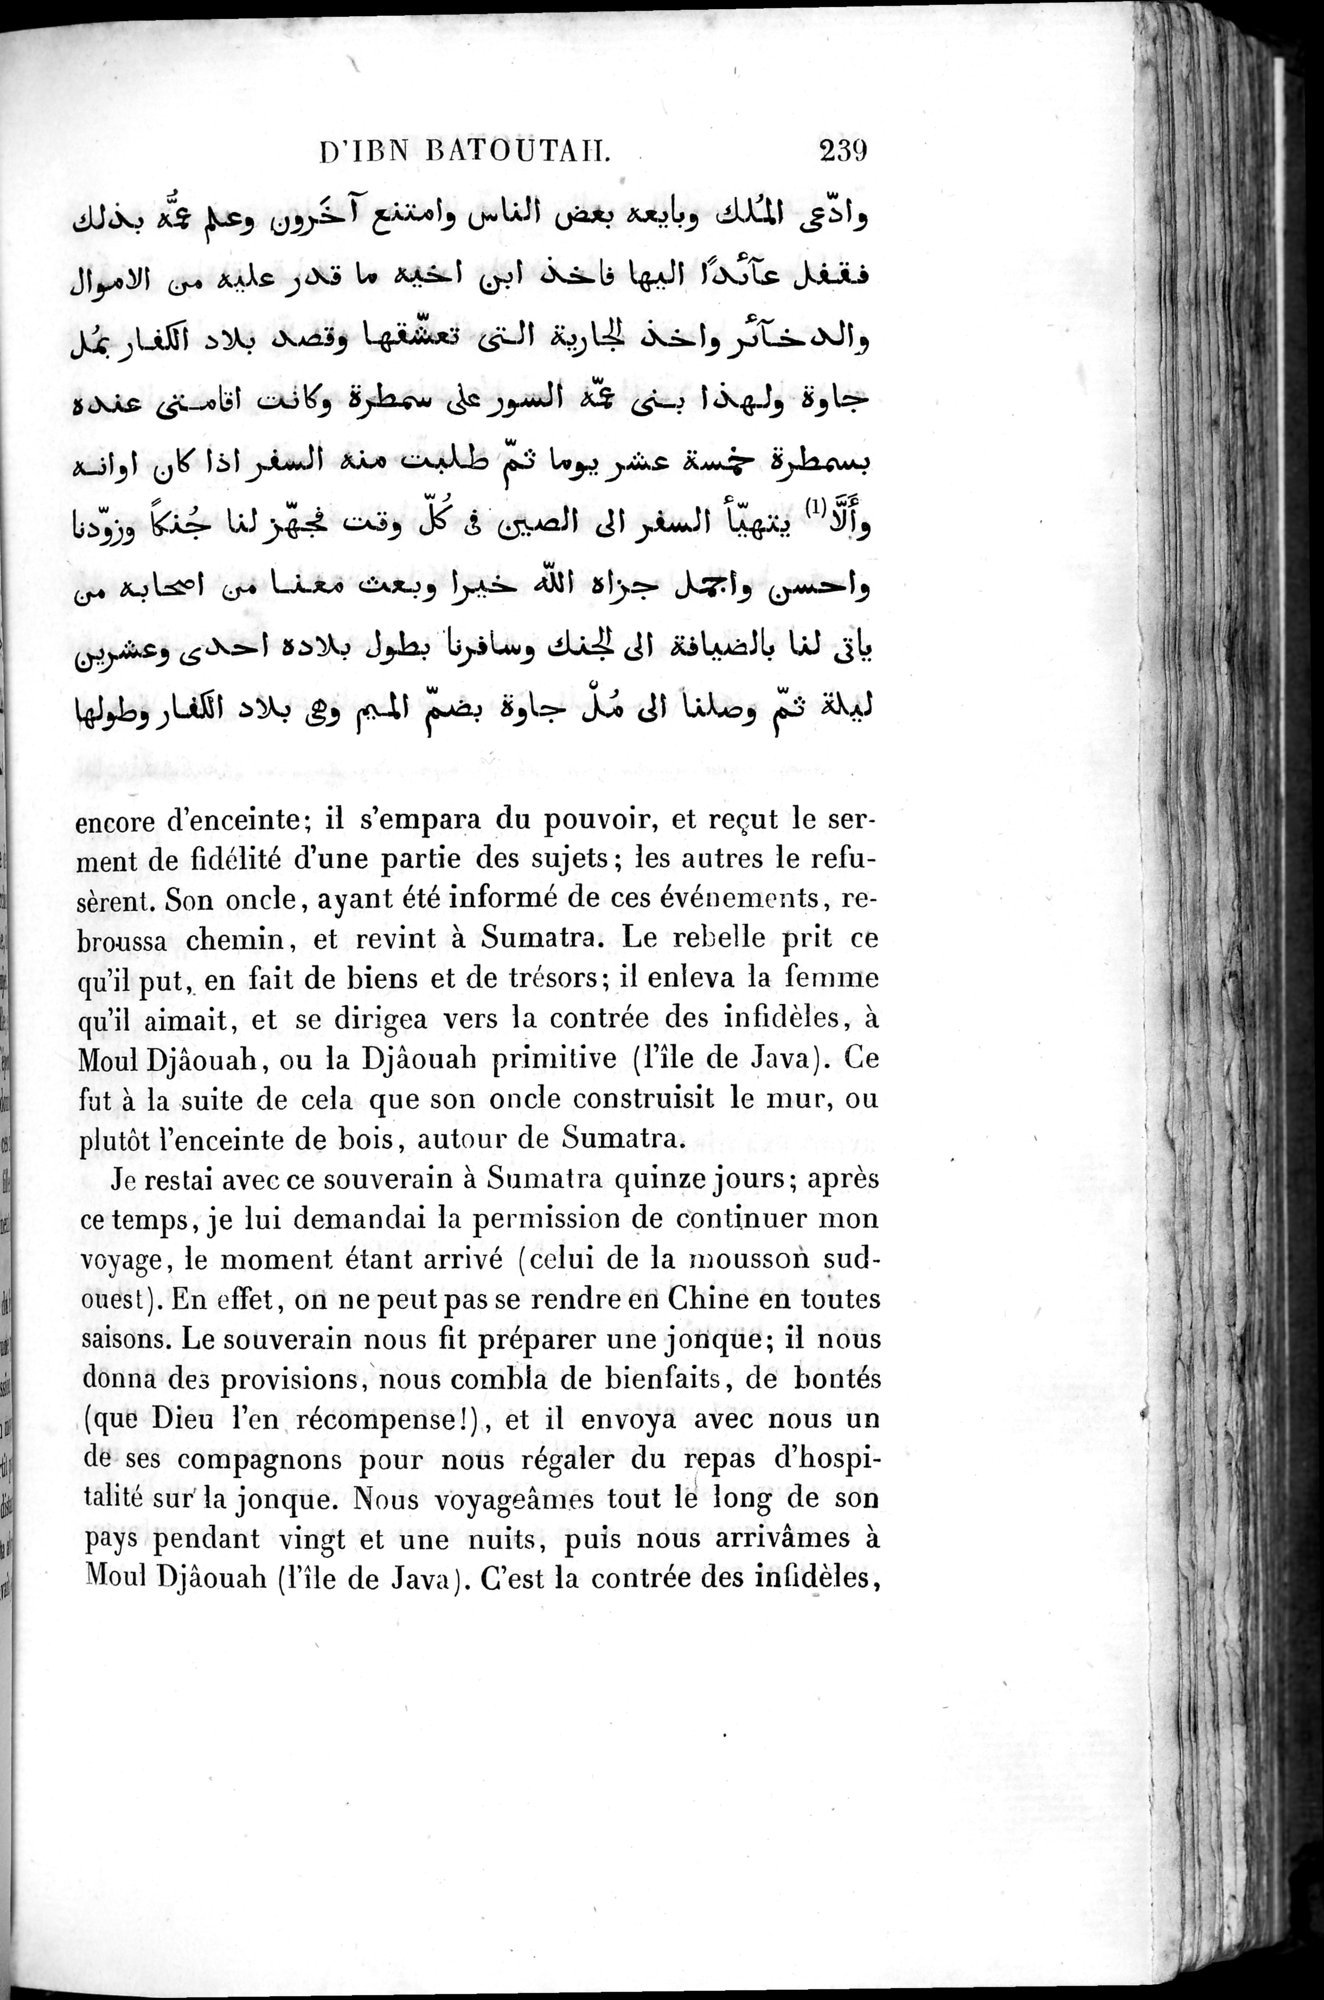 Voyages d'Ibn Batoutah : vol.4 / Page 251 (Grayscale High Resolution Image)